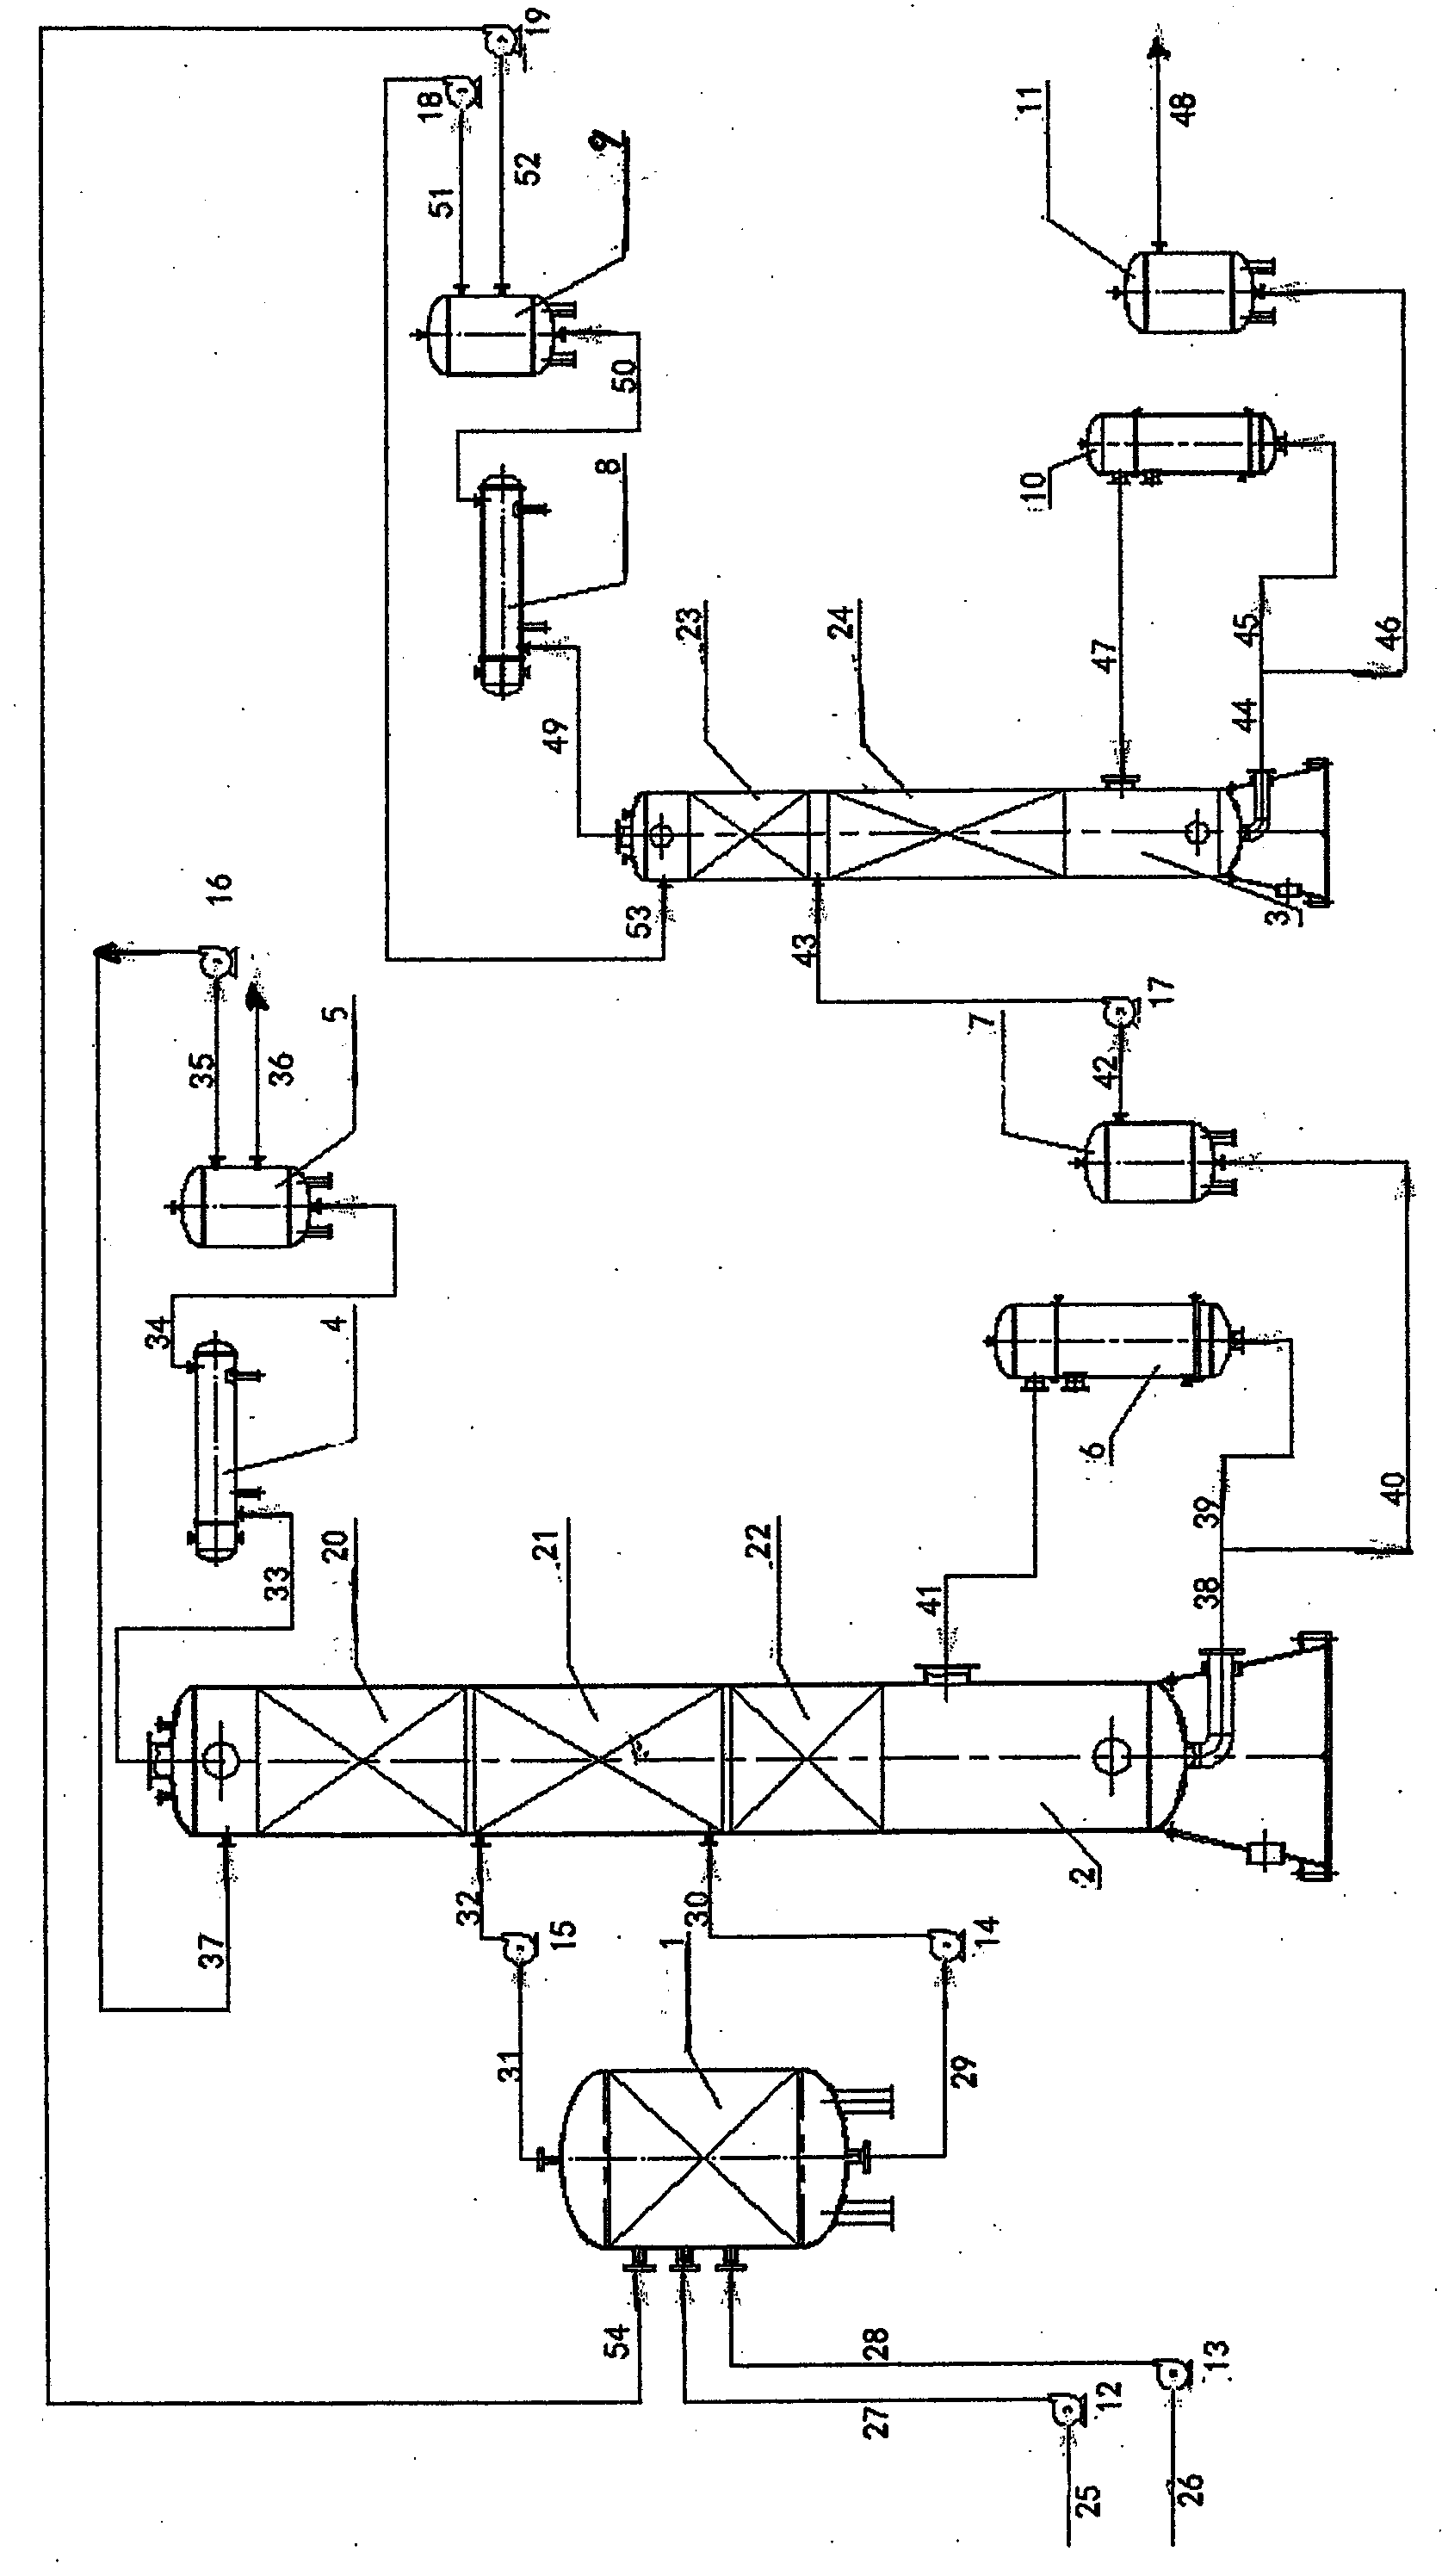 Device and method for preparing propionic anhydride through reactive distillation of acetic anhydride and propionic acid